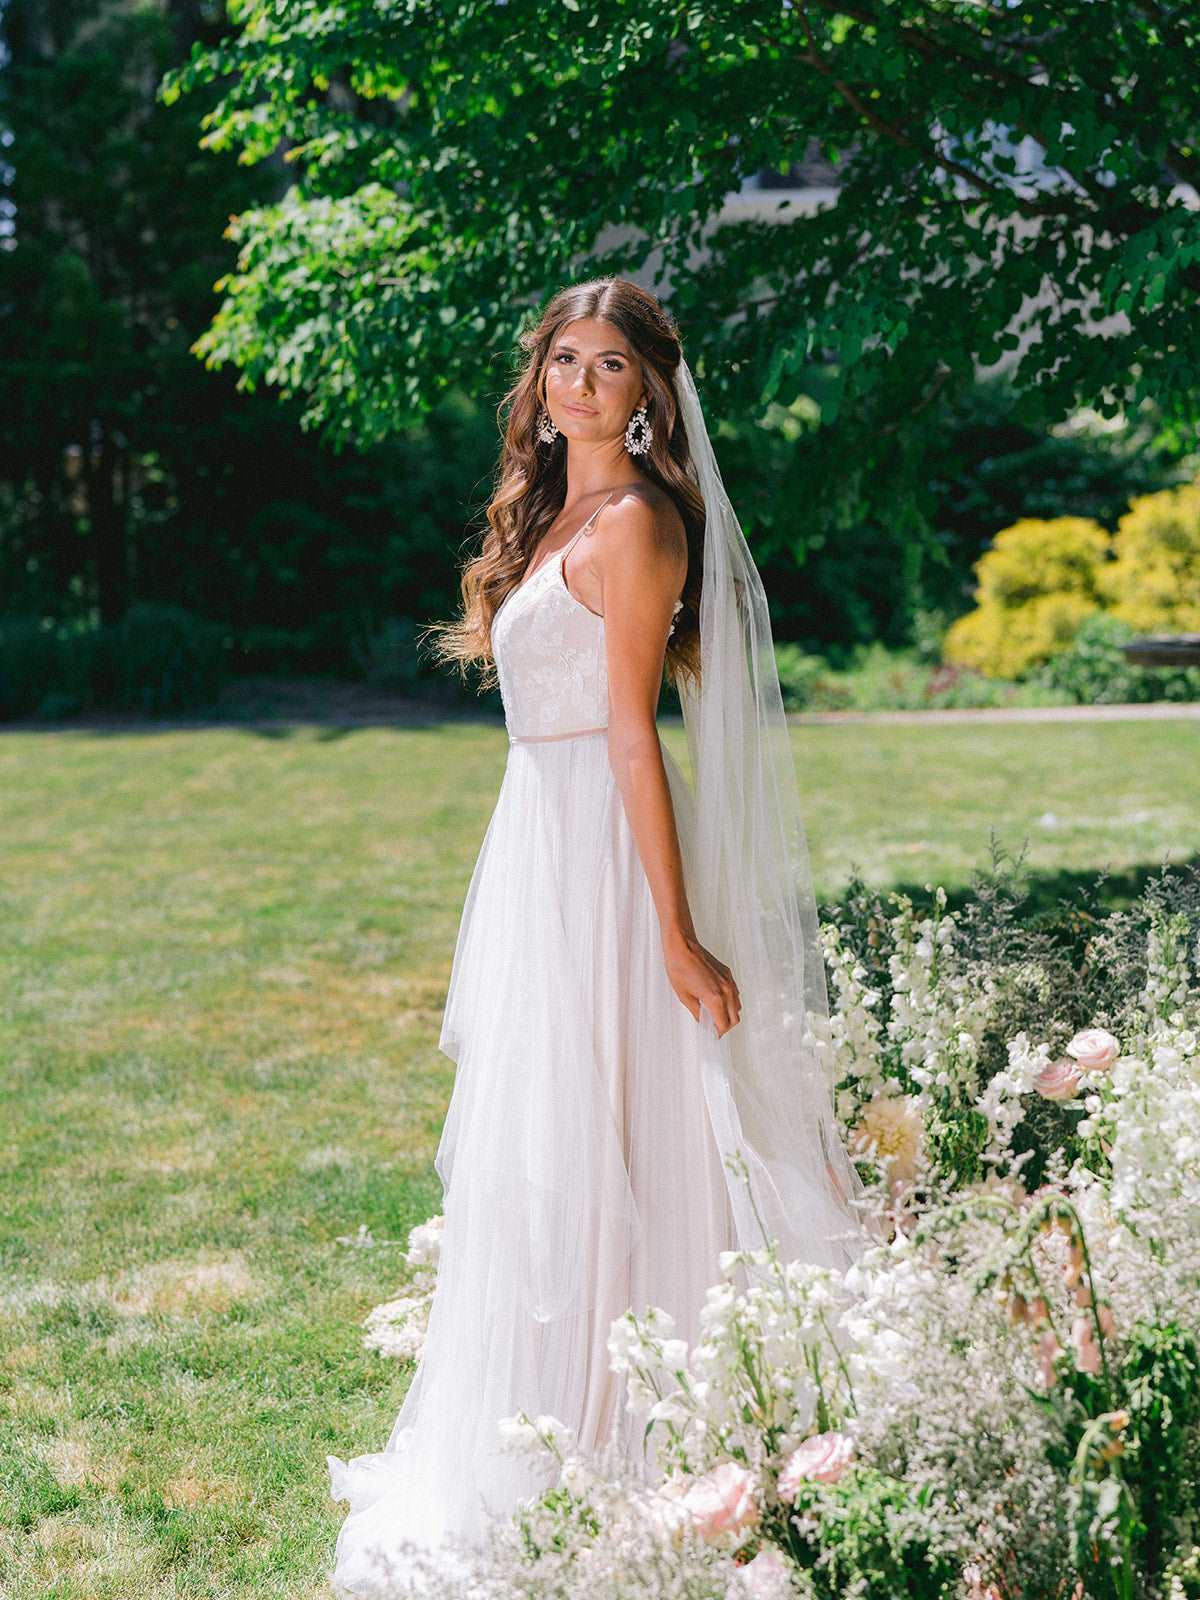 Romantic boho wedding dress by Catherine Langlois. Soft shades of milk, champagne and pewter silk and tulle with floral applique. Made to order in Toronto, Canada.